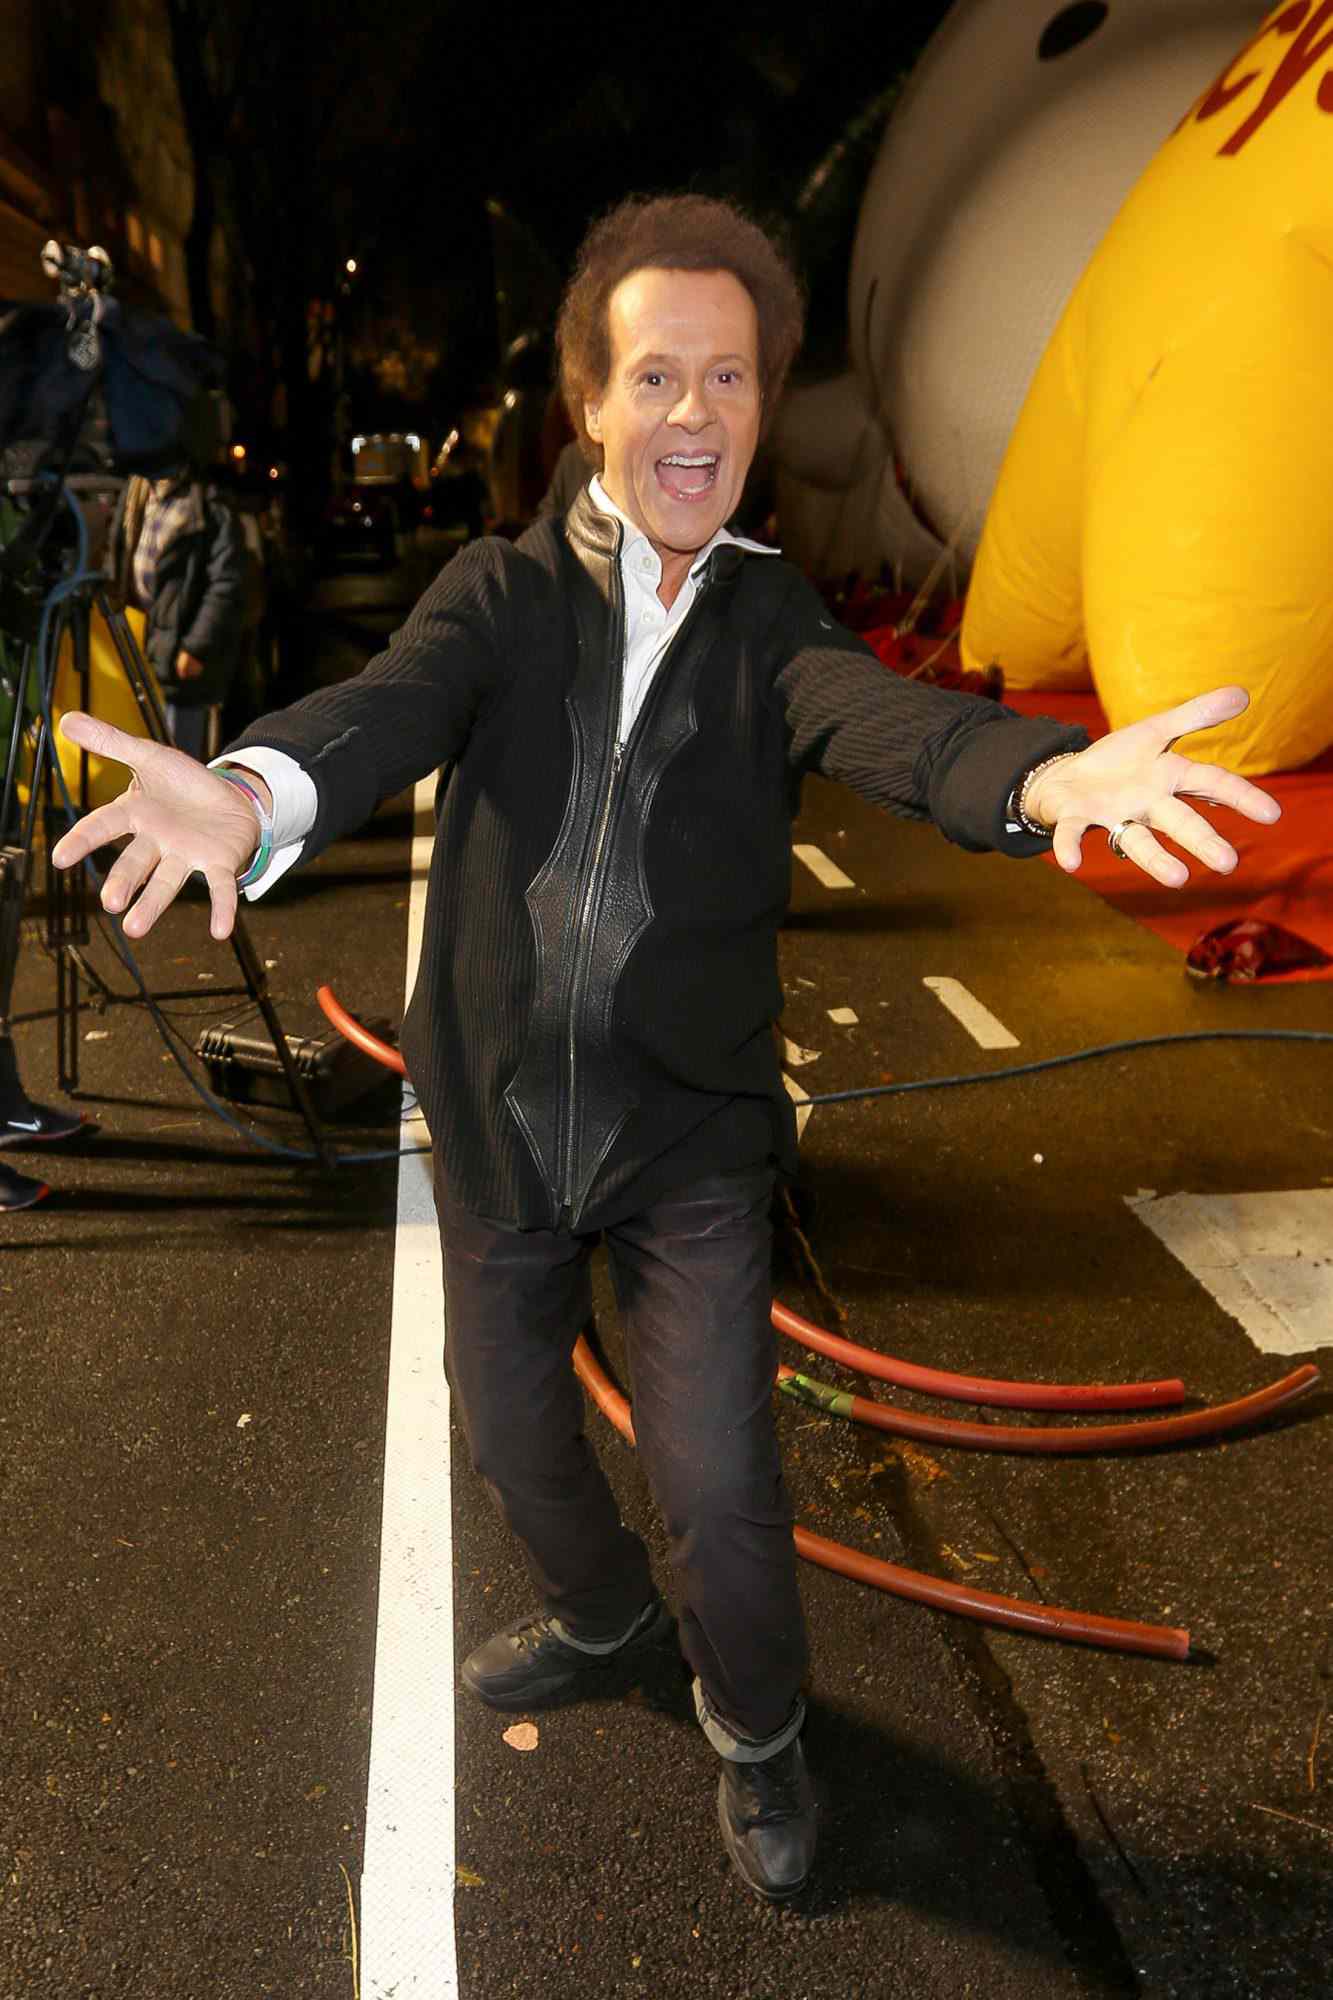 Richard Simmons at the 87th annual Macy's Thanksgiving Day Parade in New York City on Nov. 27, 2013